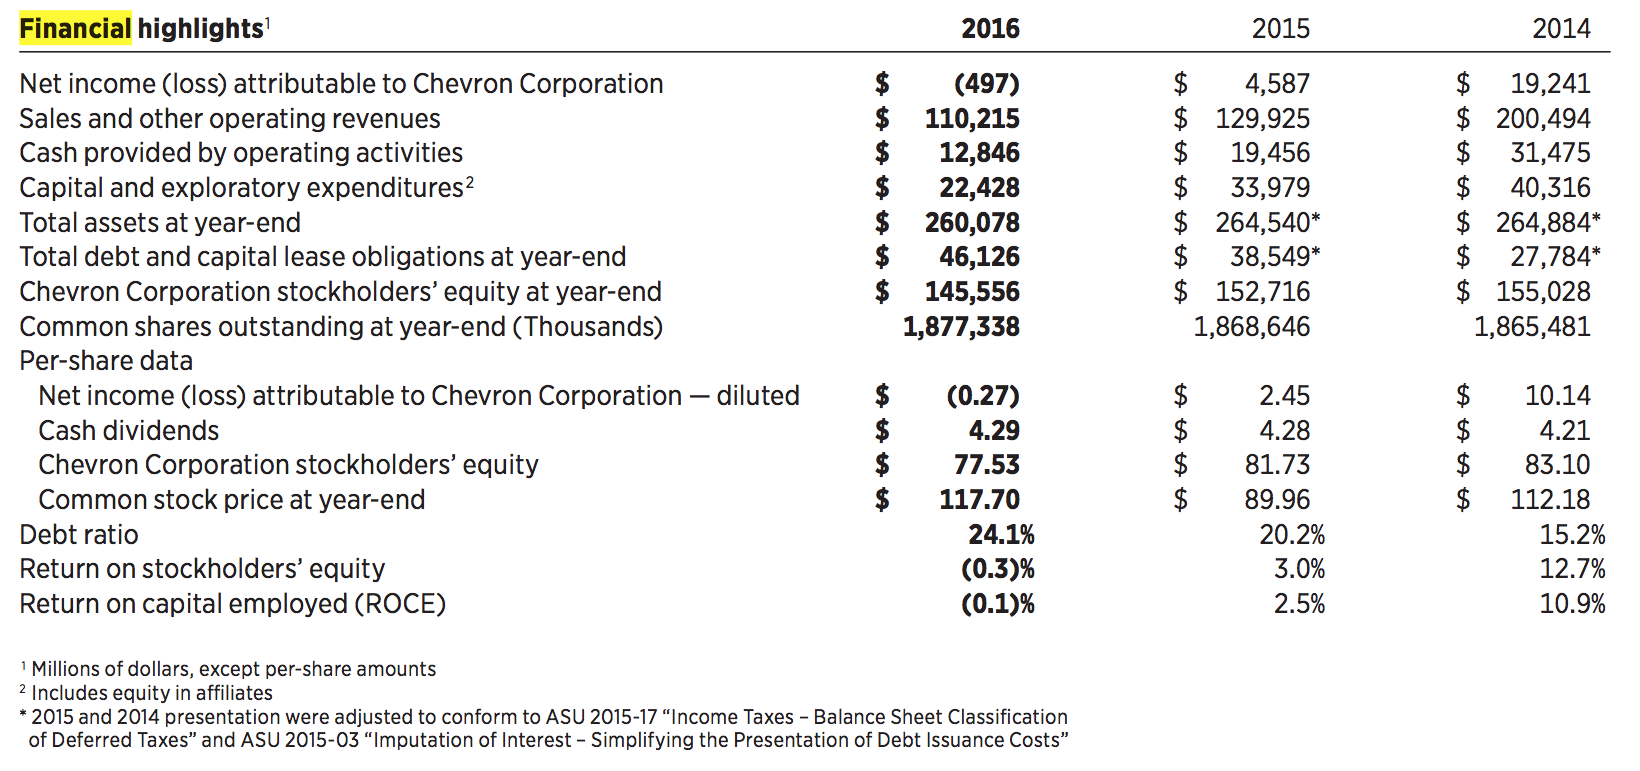 Chevron Company's Financial Management 3725 Words Research Paper